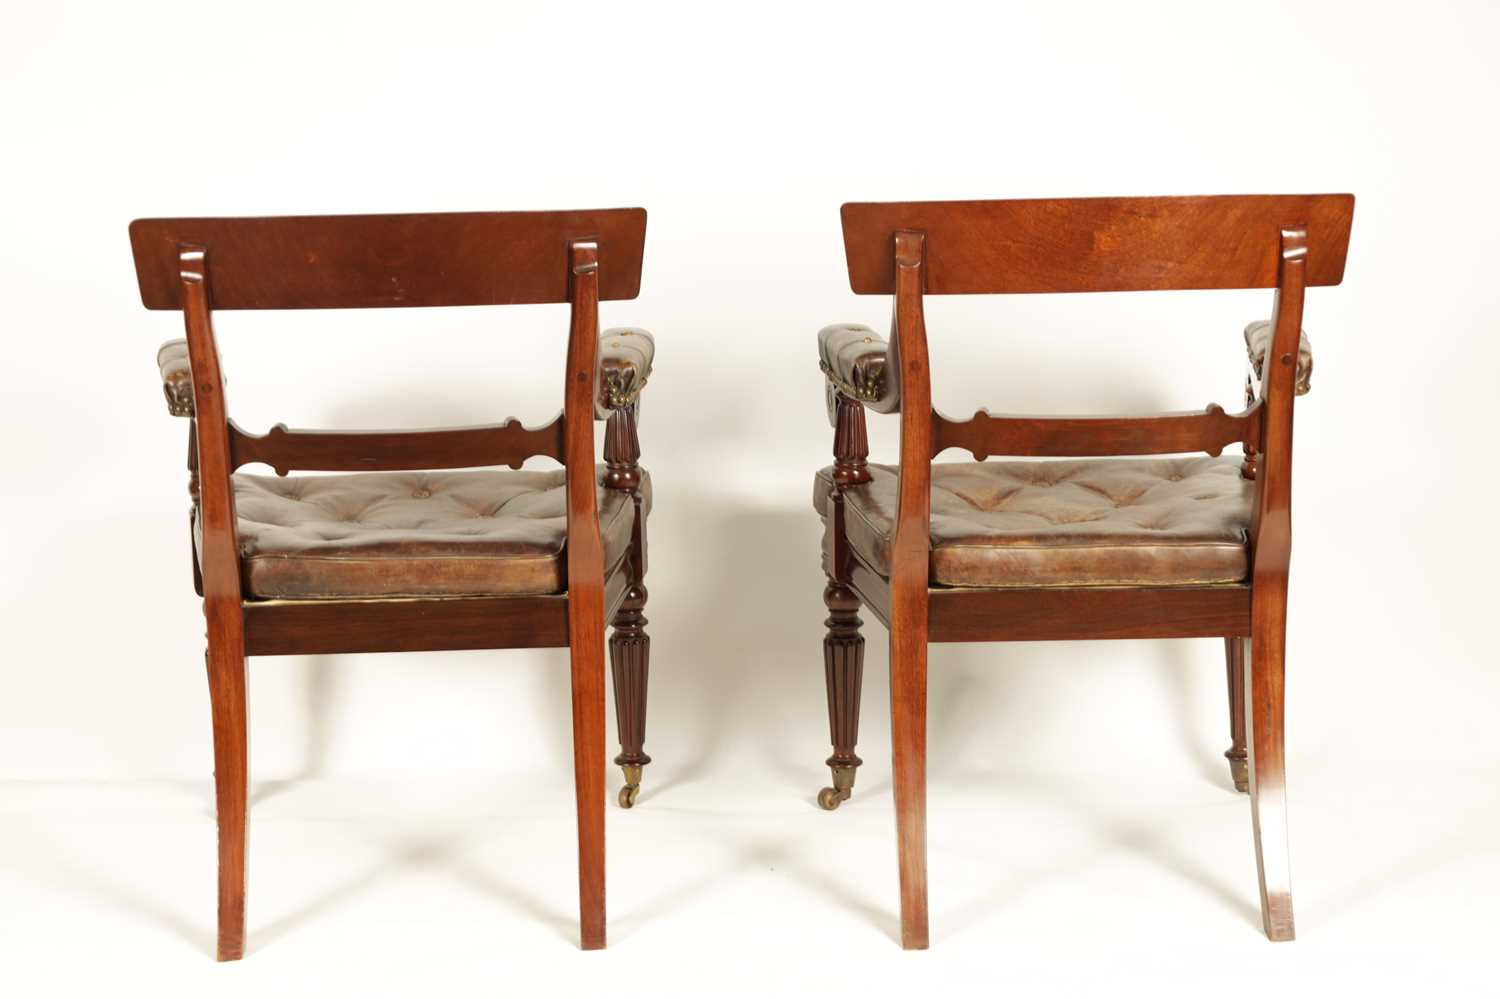 A GOOD PAIR OF REGENCY STYLE MAHOGANY DESK CHAIRS IN THE MANNER OF GILLOWS - Image 8 of 10